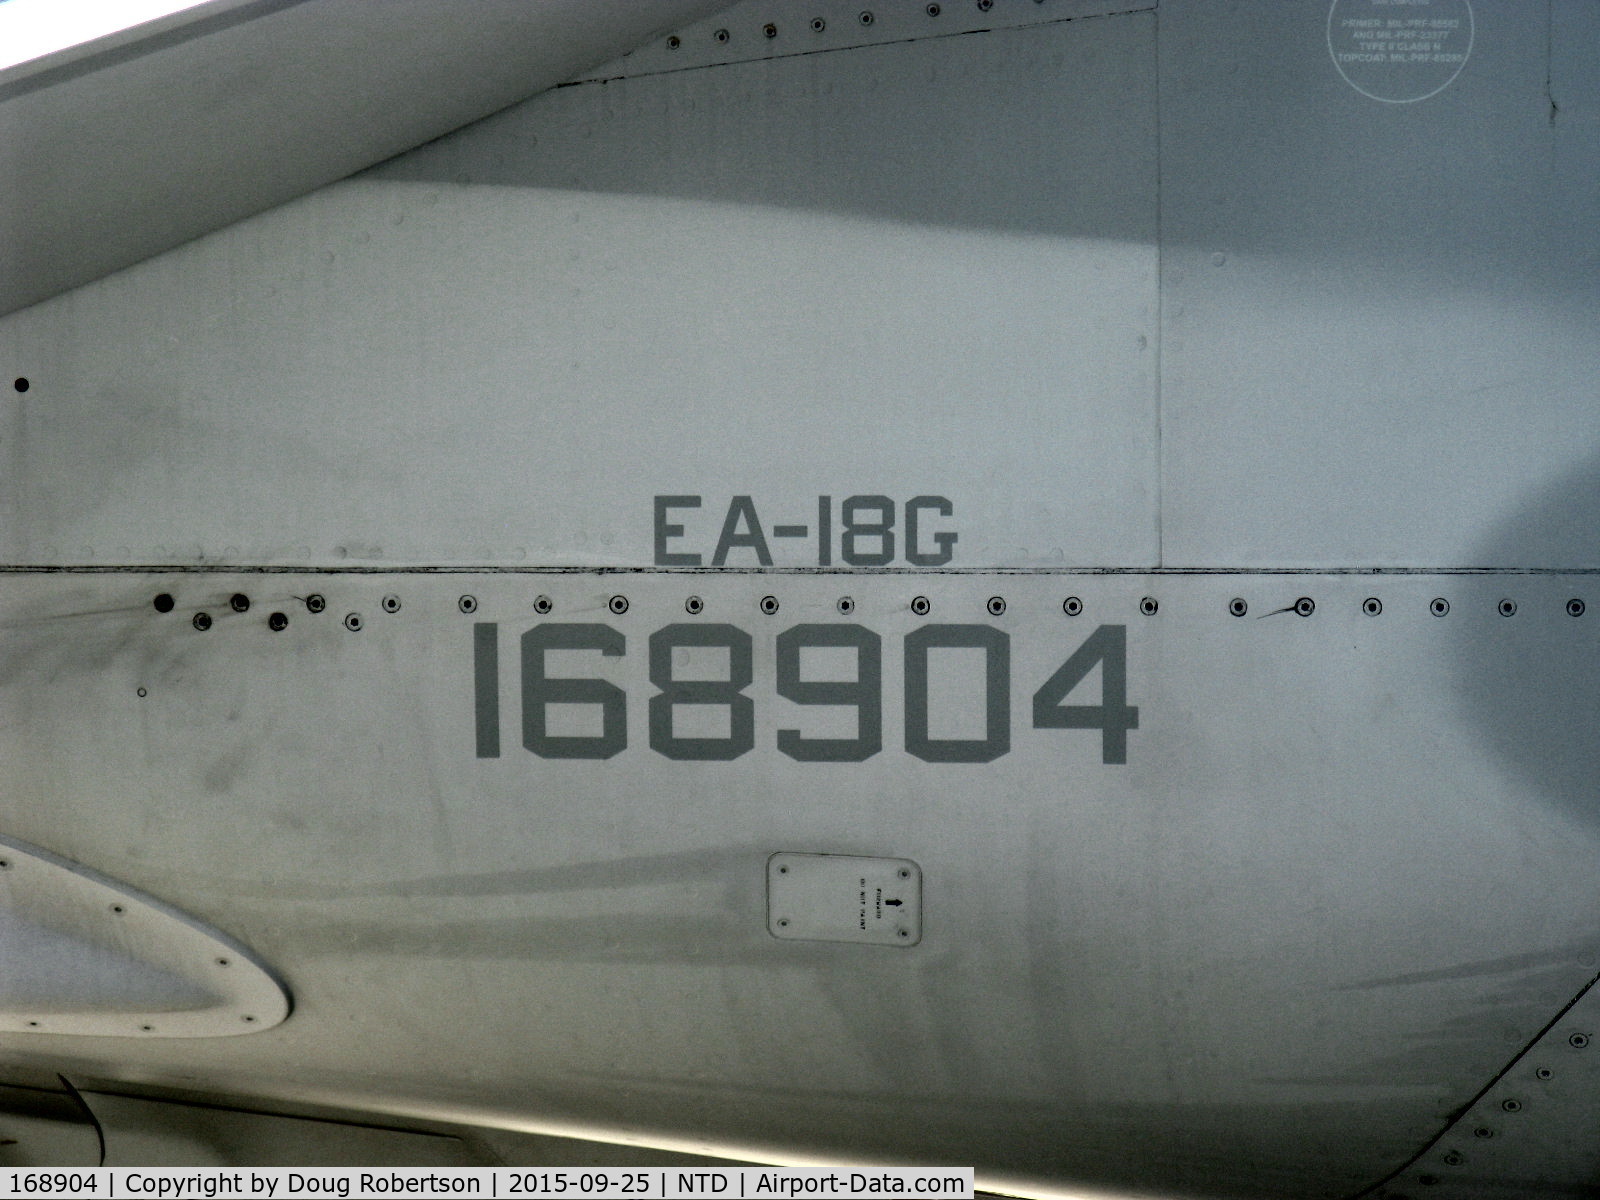 168904, Boeing EA-18G Growler C/N G-102, Boeing EA-18G GROWLER, two General Electric F414-GE-400 Turbofans, 14,000 lb st dry, 22,000 lb st/afterburners, max spd Mach 1.8 1,190 mph, 2 seat Electronic Warfare aircraft replaced 4 seat EA-6B PROWLER, BuNo